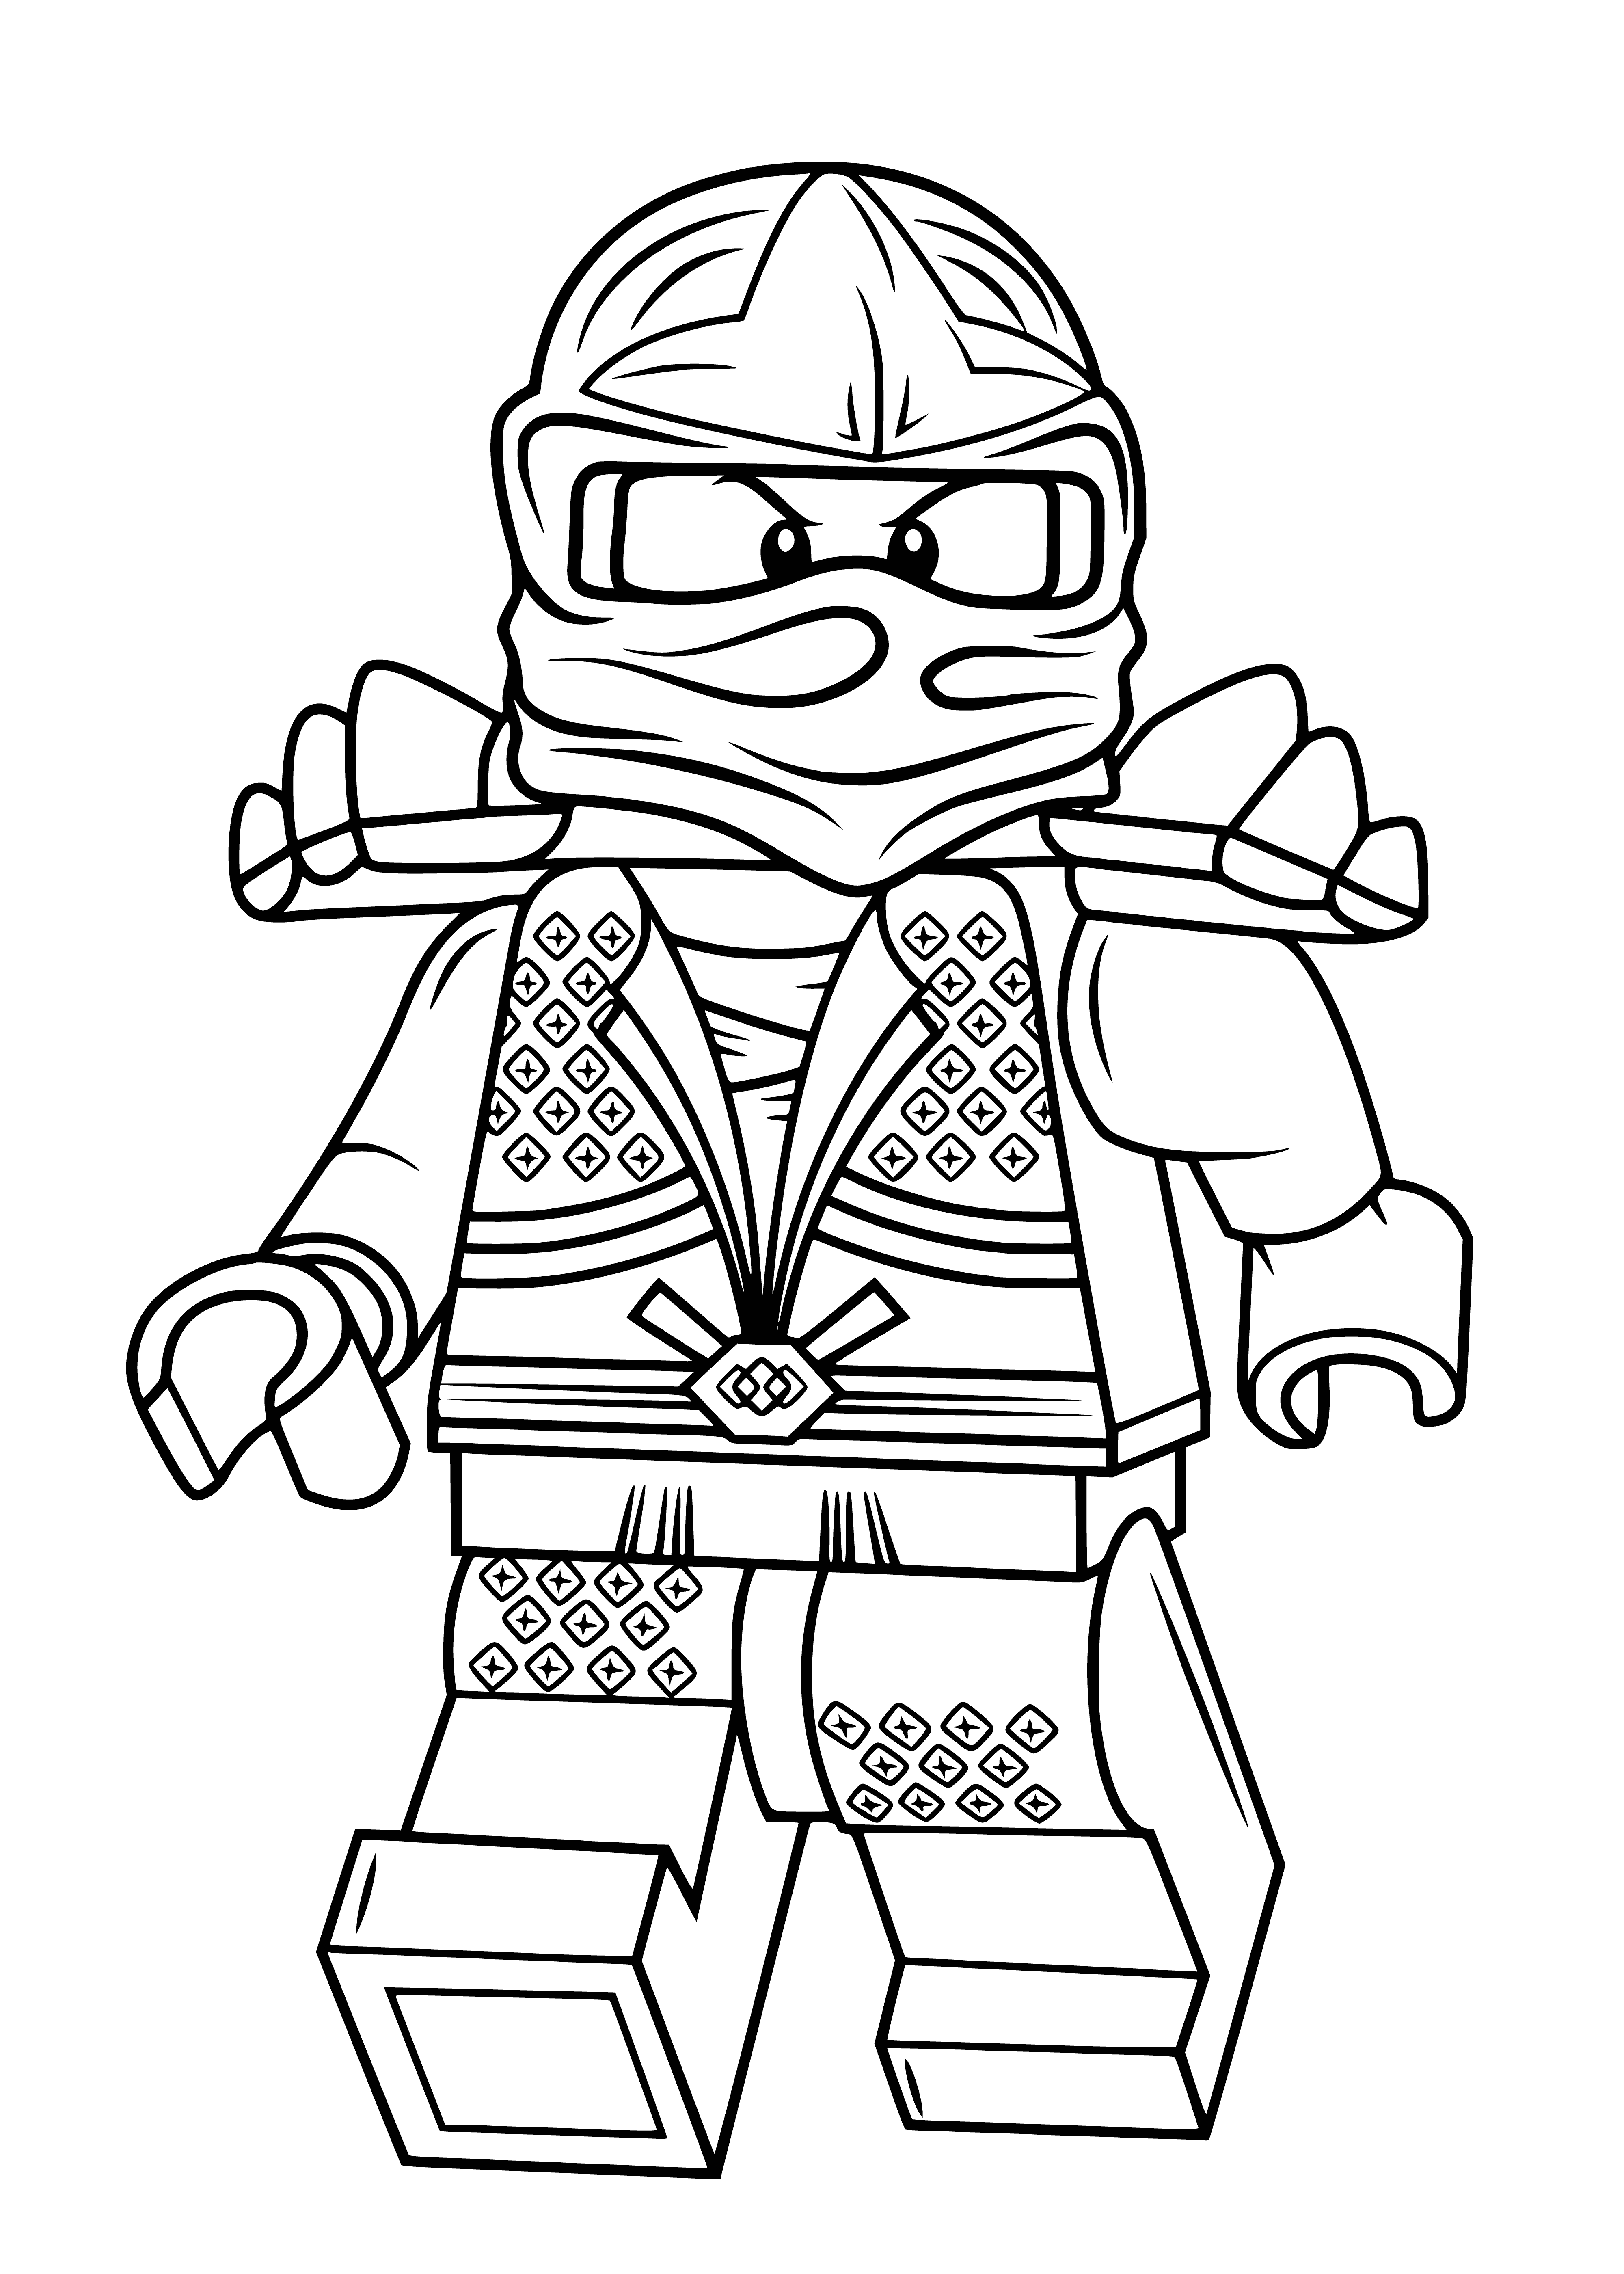 coloring page: Lloyd in green/grey armor with gold sword, standing next to green-eyed white/grey dragon on coloring page. #lego #ninjago